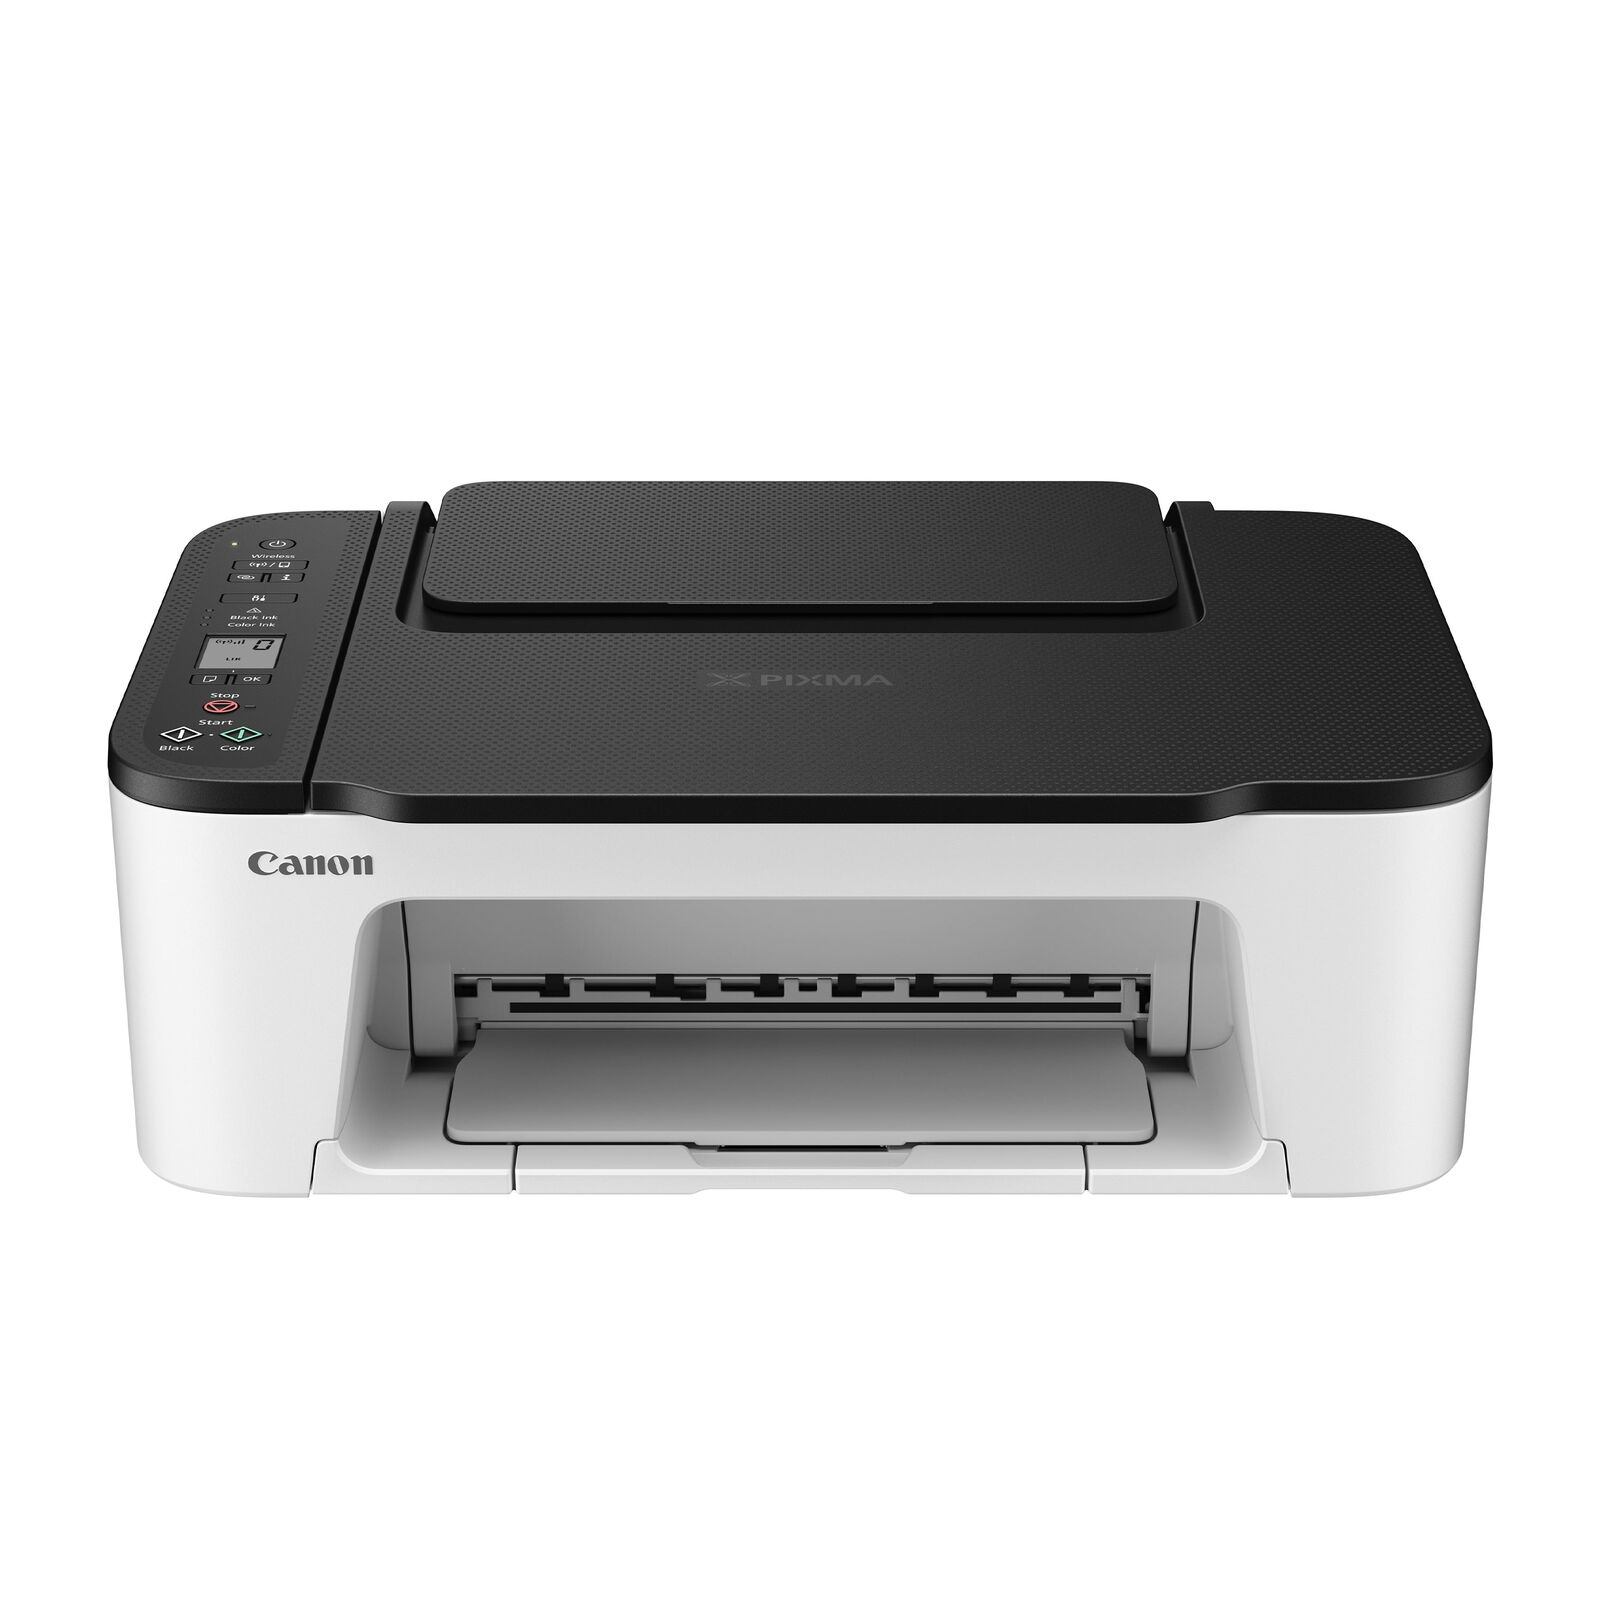 PIXMA TS3522 -Wireless All-In-One Printer. Available Now for $37.00